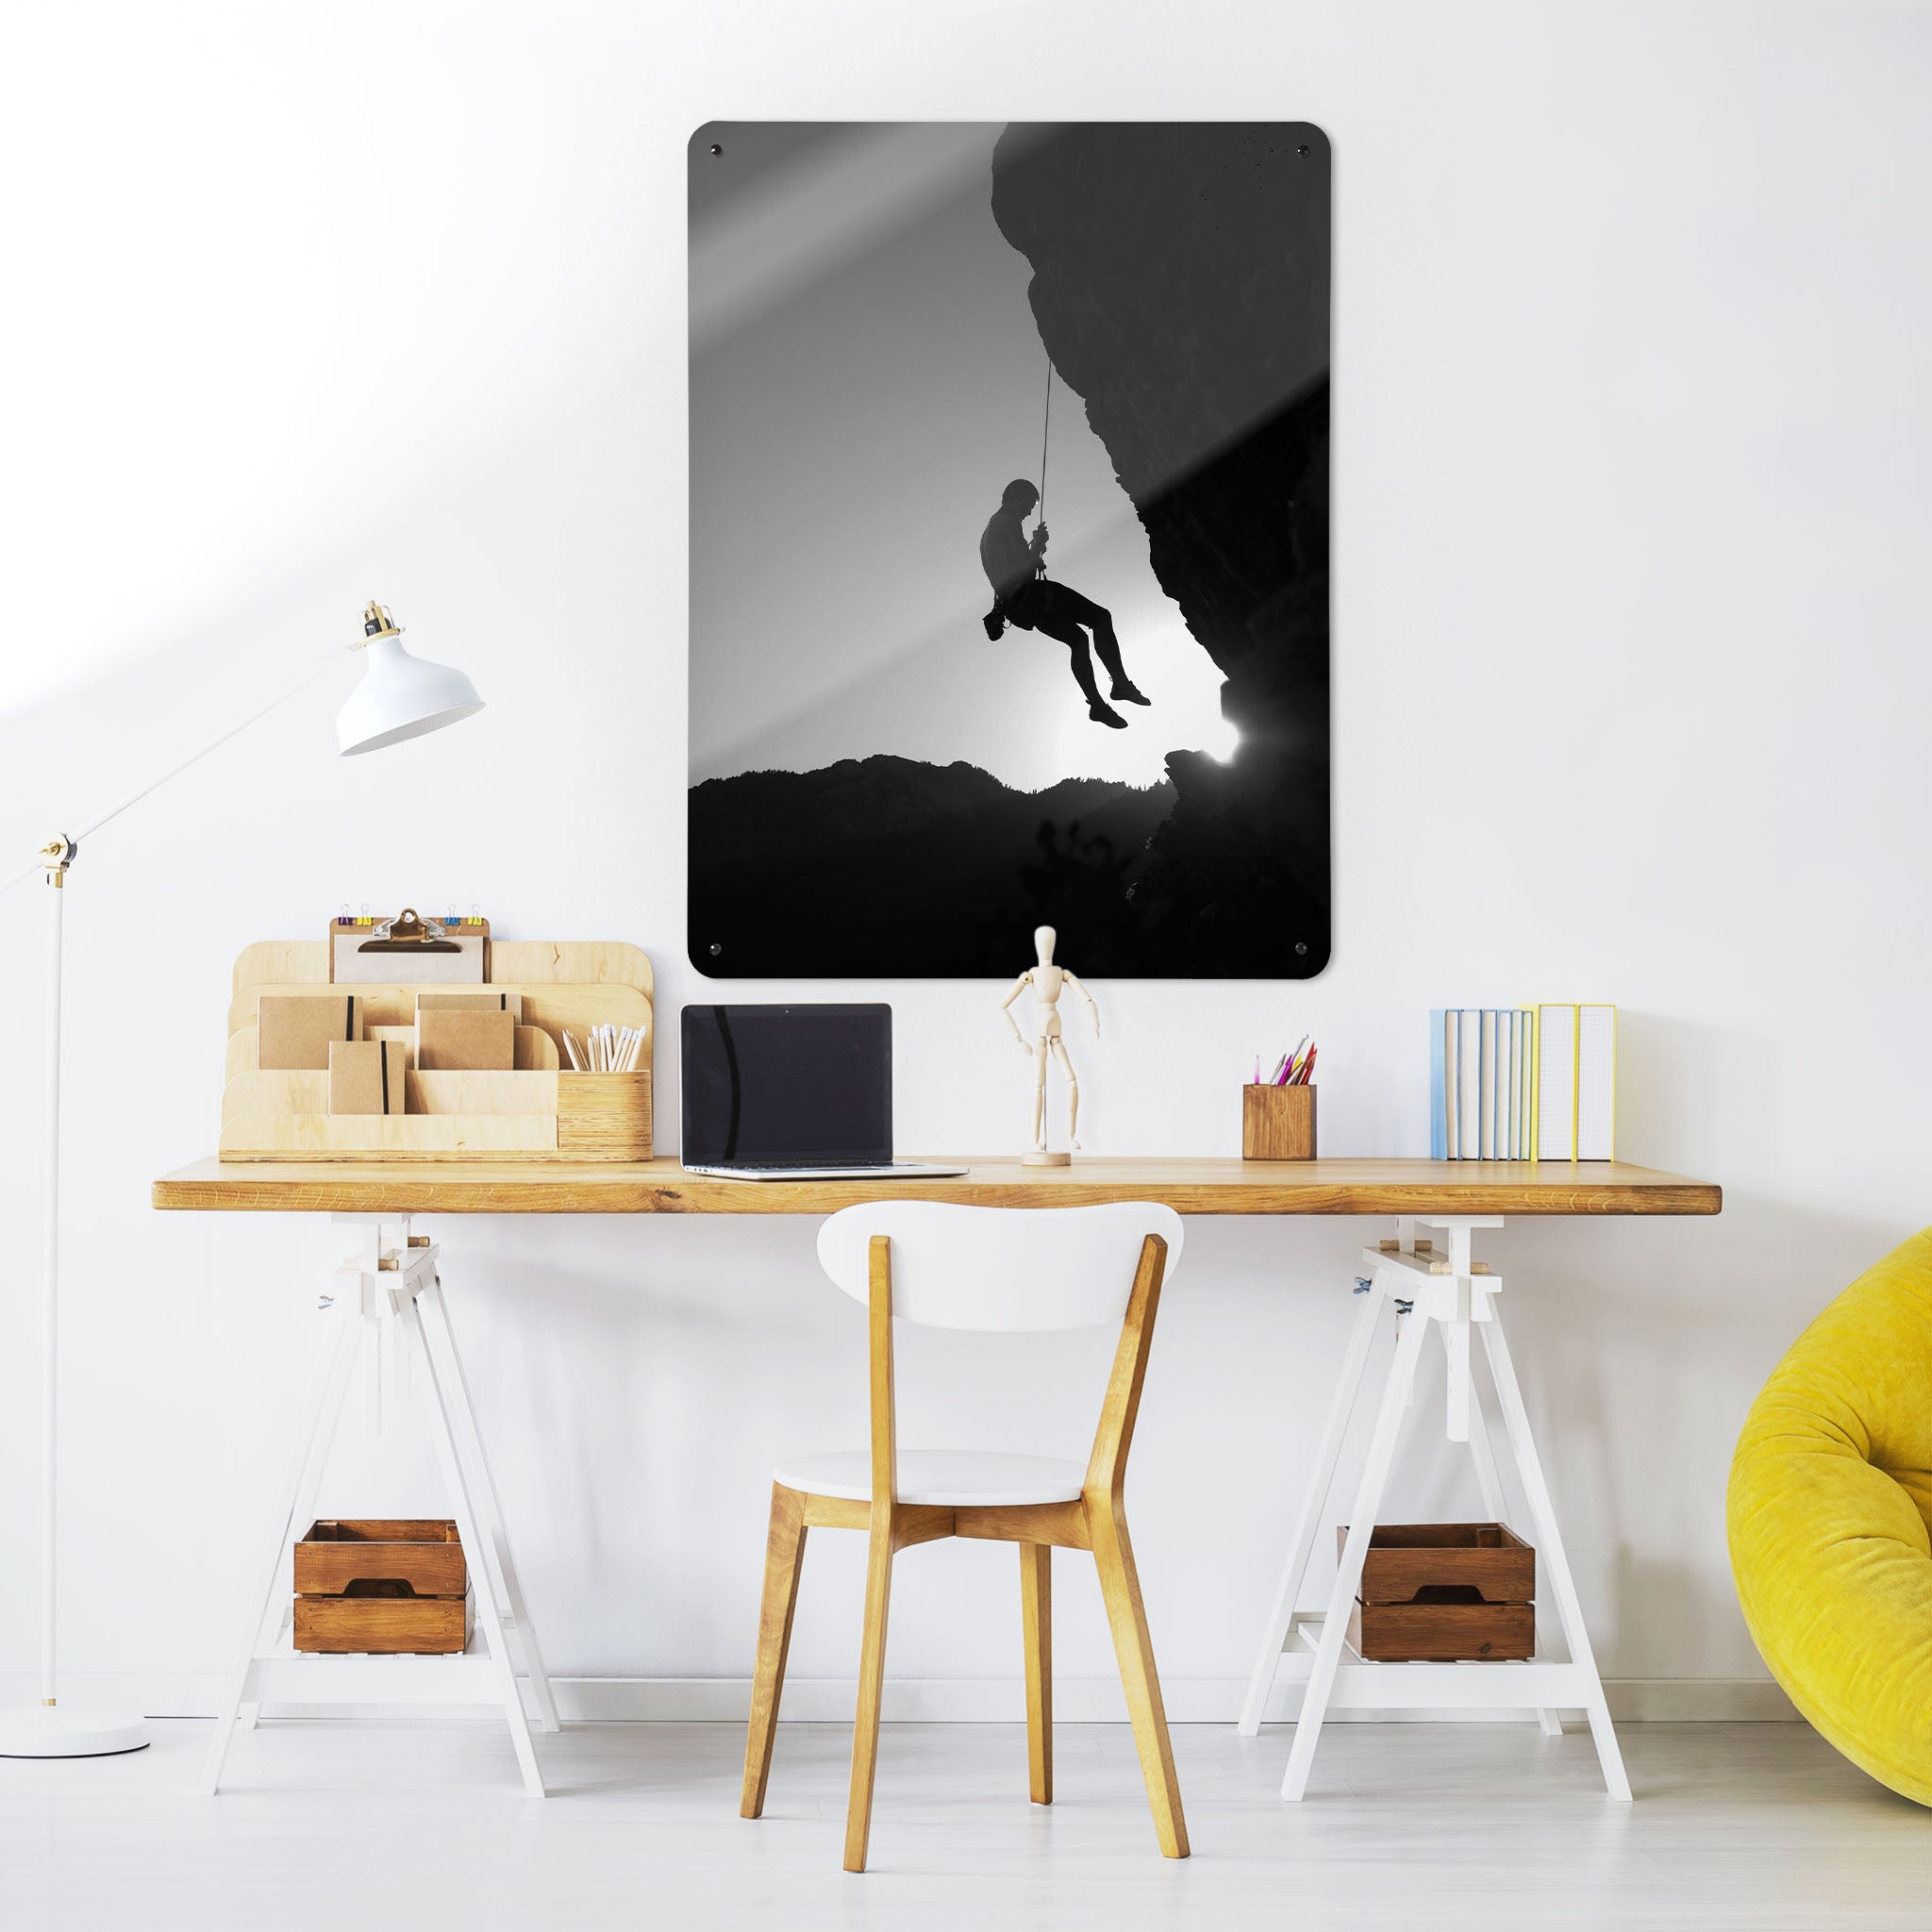 A desk in a workspace setting in a white interior with a magnetic metal wall art panel showing a black and white photographic image of a rock climber suspended on a cliff in silhouette 